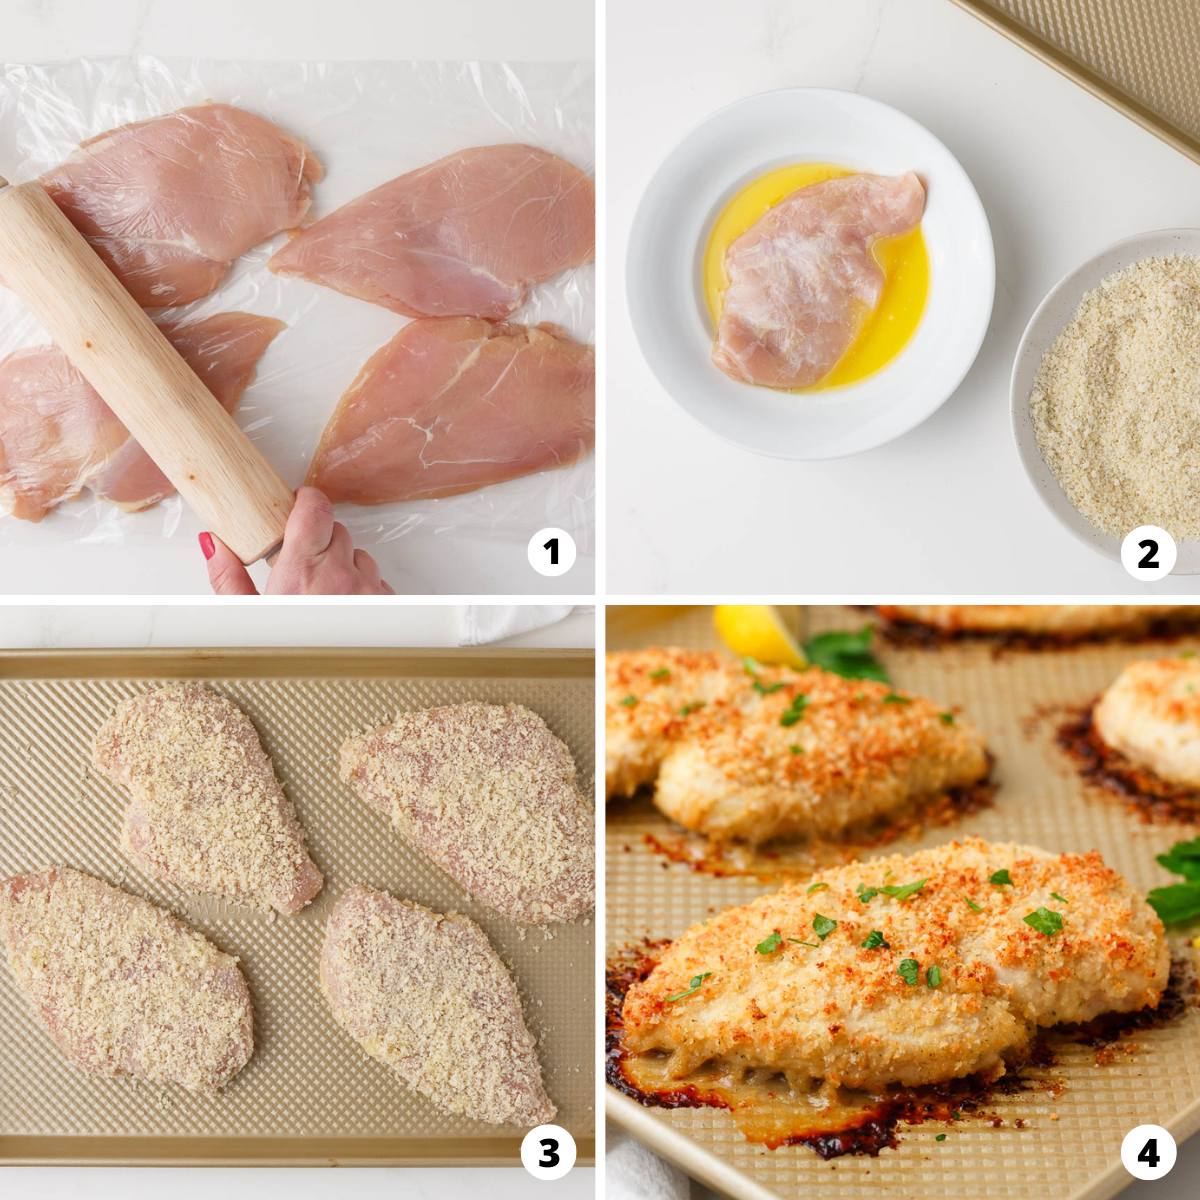 Showing how to make ranch chicken in a 4 step collage.